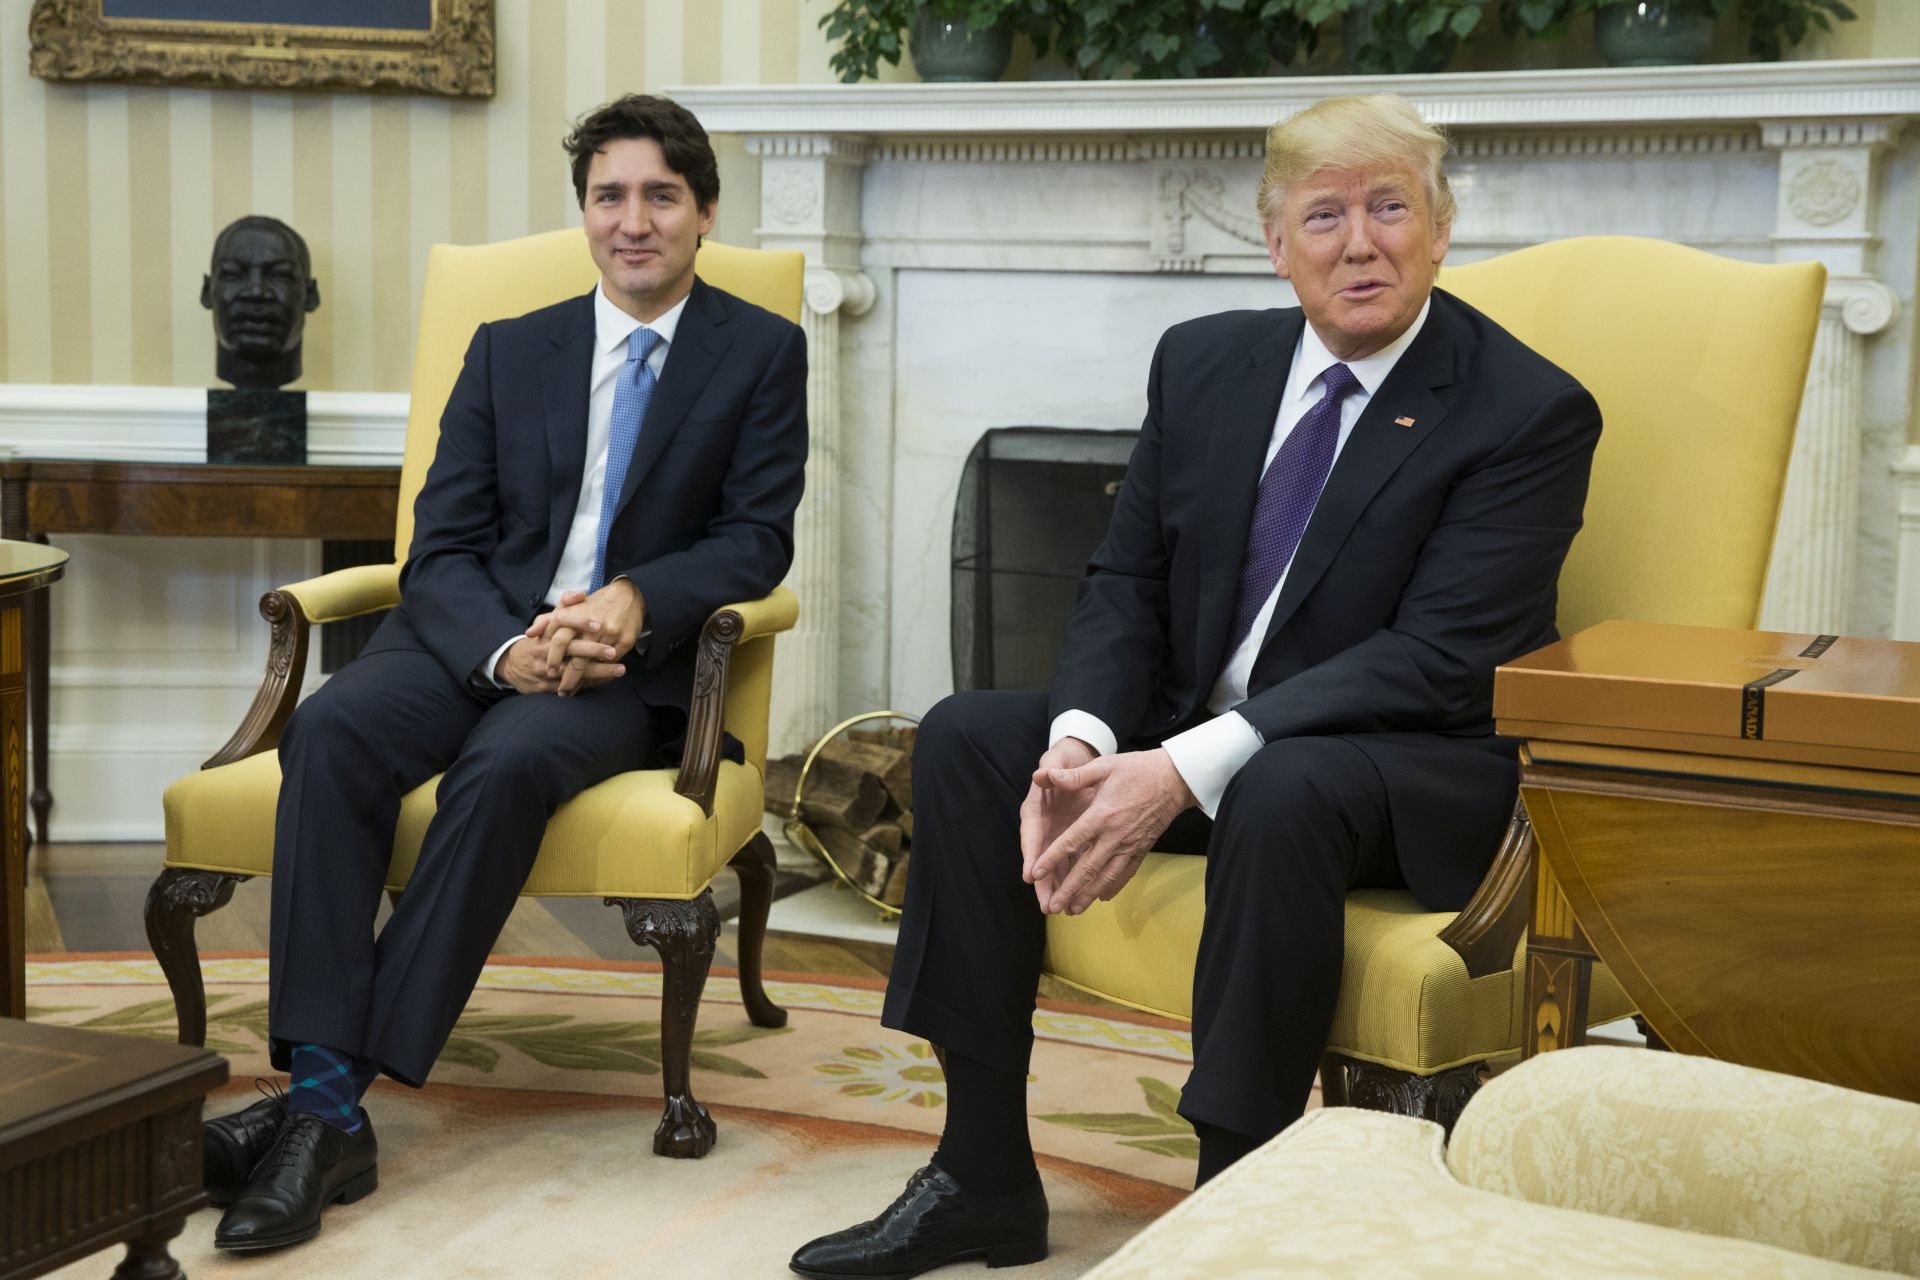 epa05791206 US President Donald J. Trump (R) meets with Canadian Prime Minister Justin Trudeau (L) in the Oval Office of the White House in Washington, DC, USA, 13  February 2017. Presidents Trump and Trudeau will hold a roundtable discussion on advancement of women entrepreneurs and business leaders, followed by a joint press conference.  EPA/SHAWN THEW